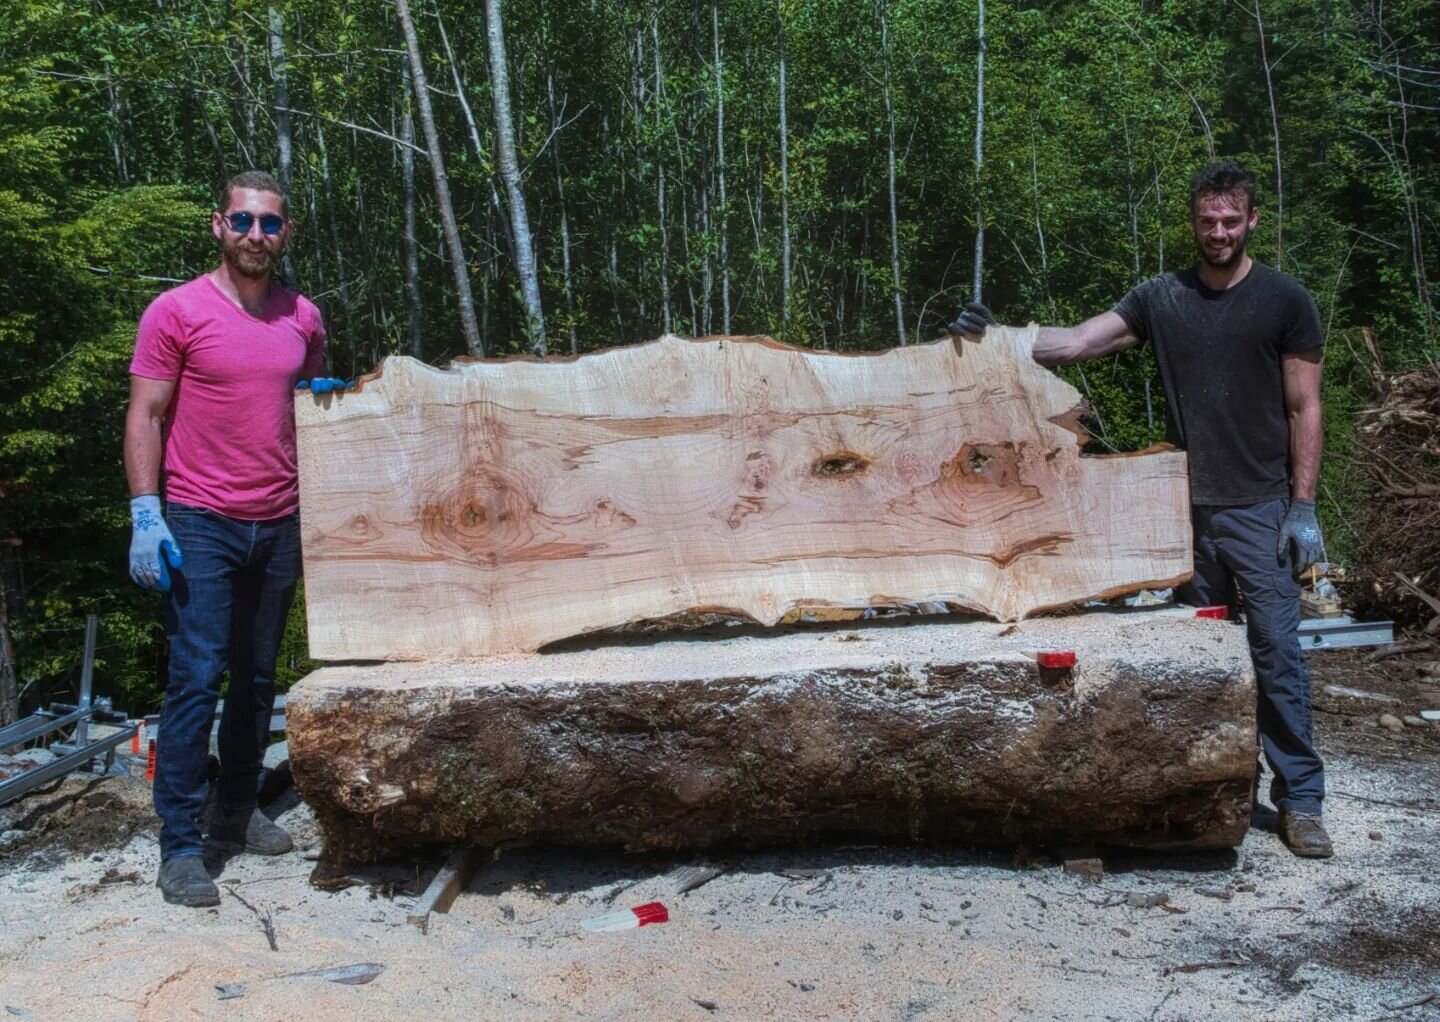 The process, milling with friends
#liveedge #liveedgetables #livedgeslabs #milling #chainsaw #chainsawmill #salvagedwood